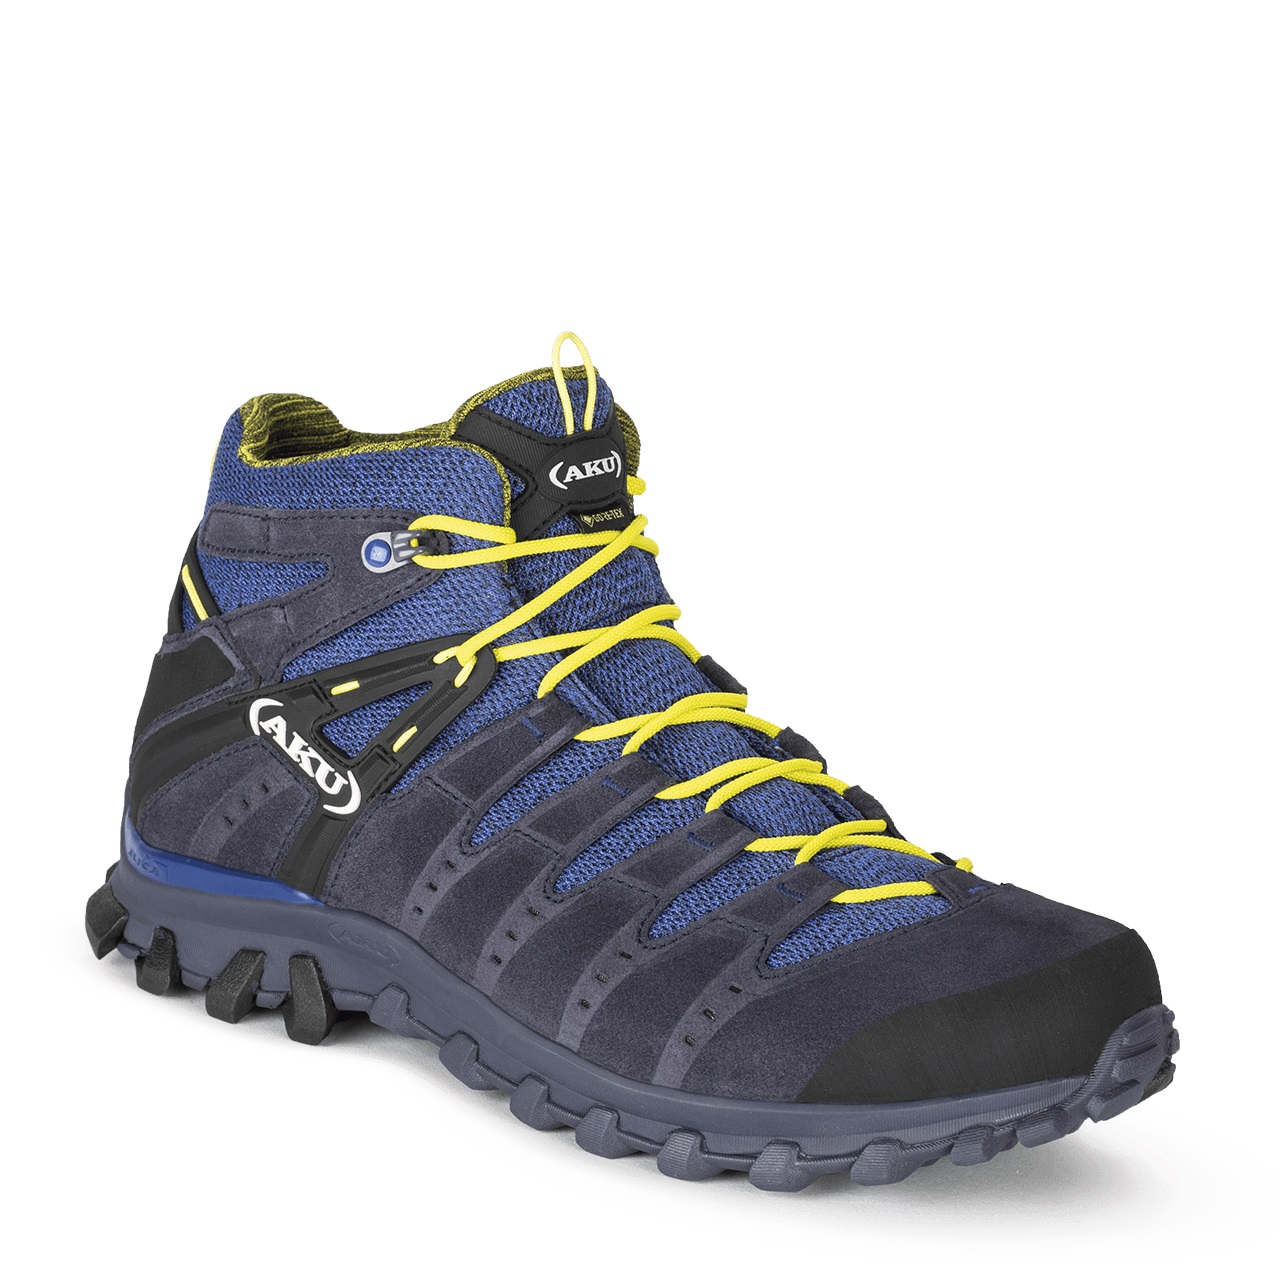 How to choose Alpine Hiking Boots - No 